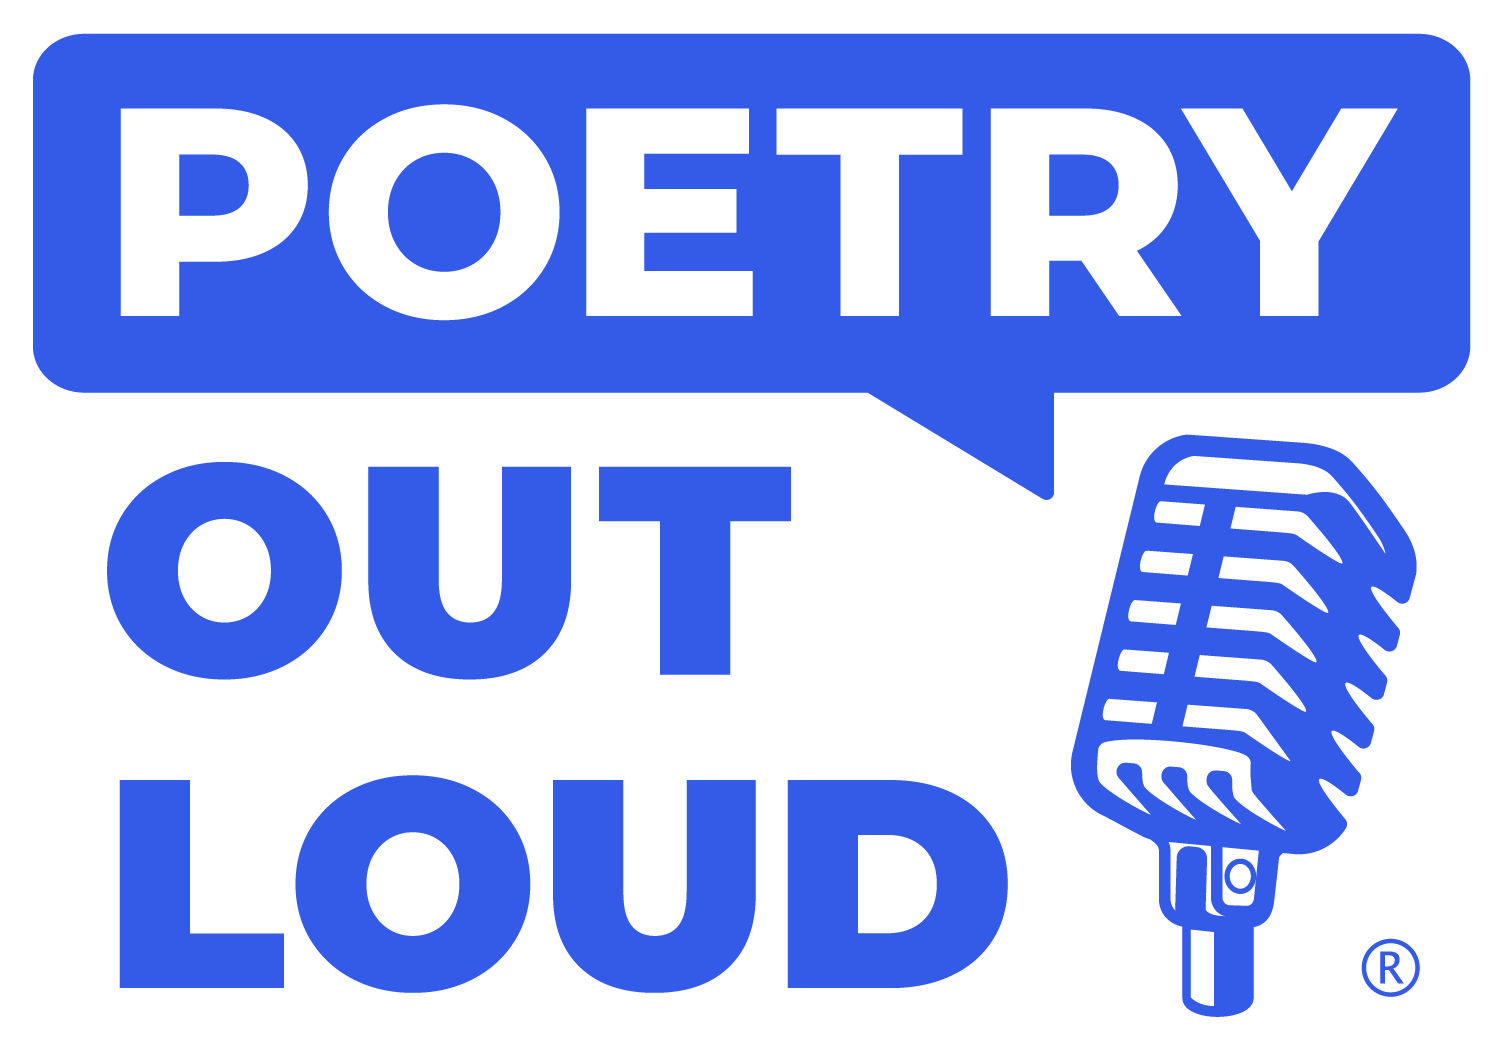 The Poetry Out Loud logo.